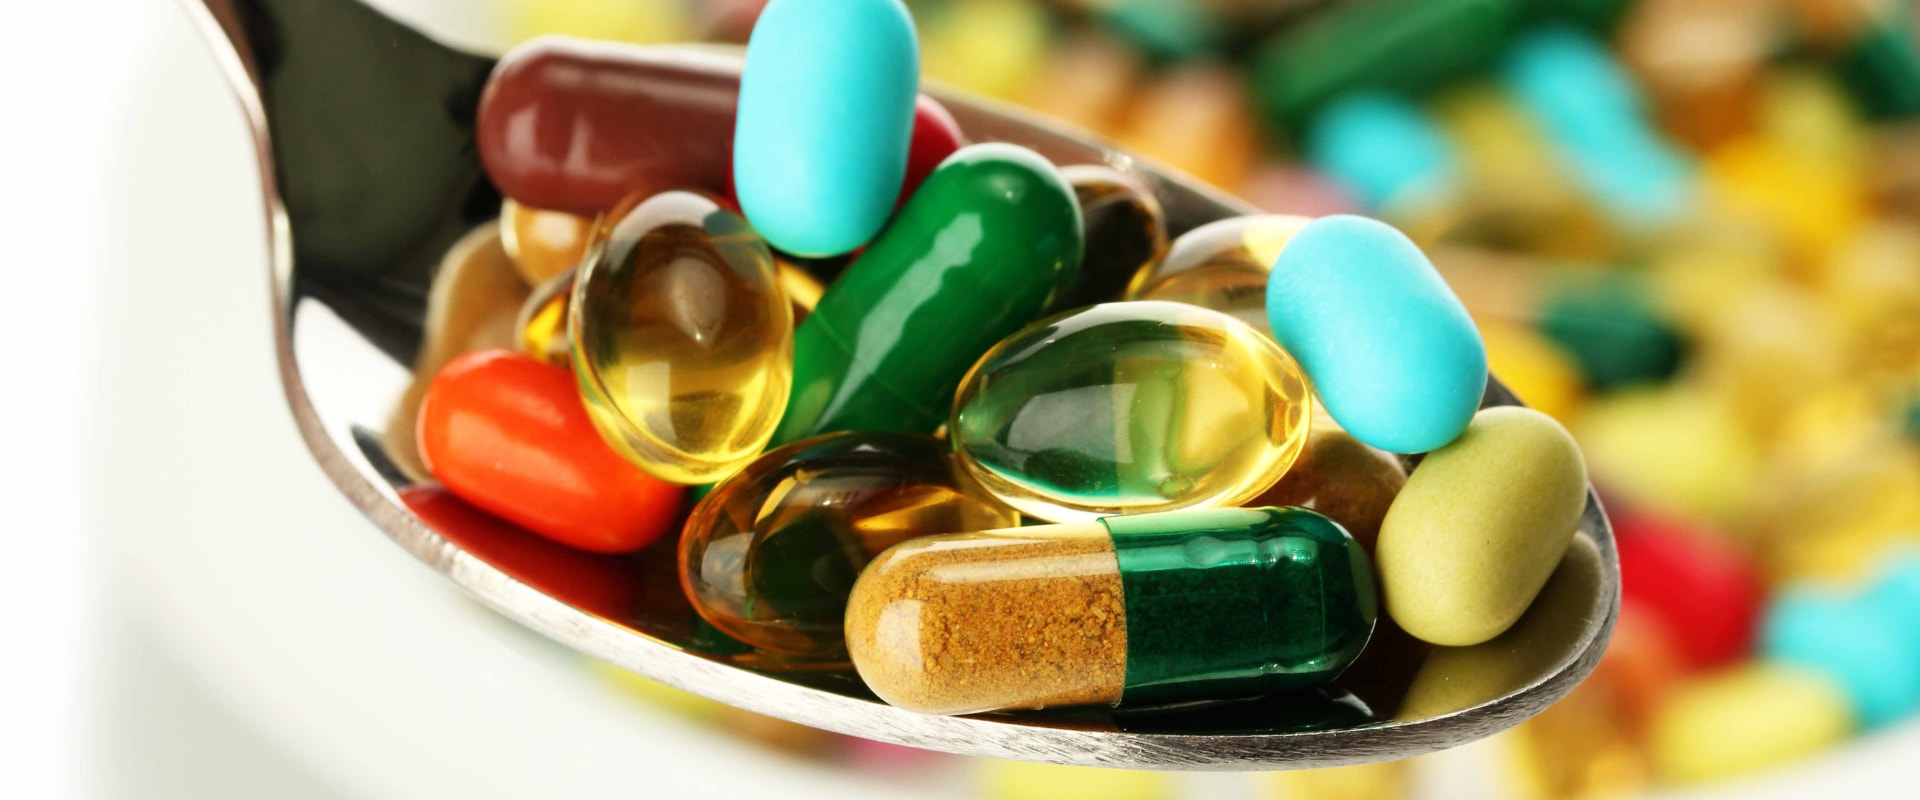 Can I Take Health Supplements While on Medications or Treatments for an Existing Medical Condition?